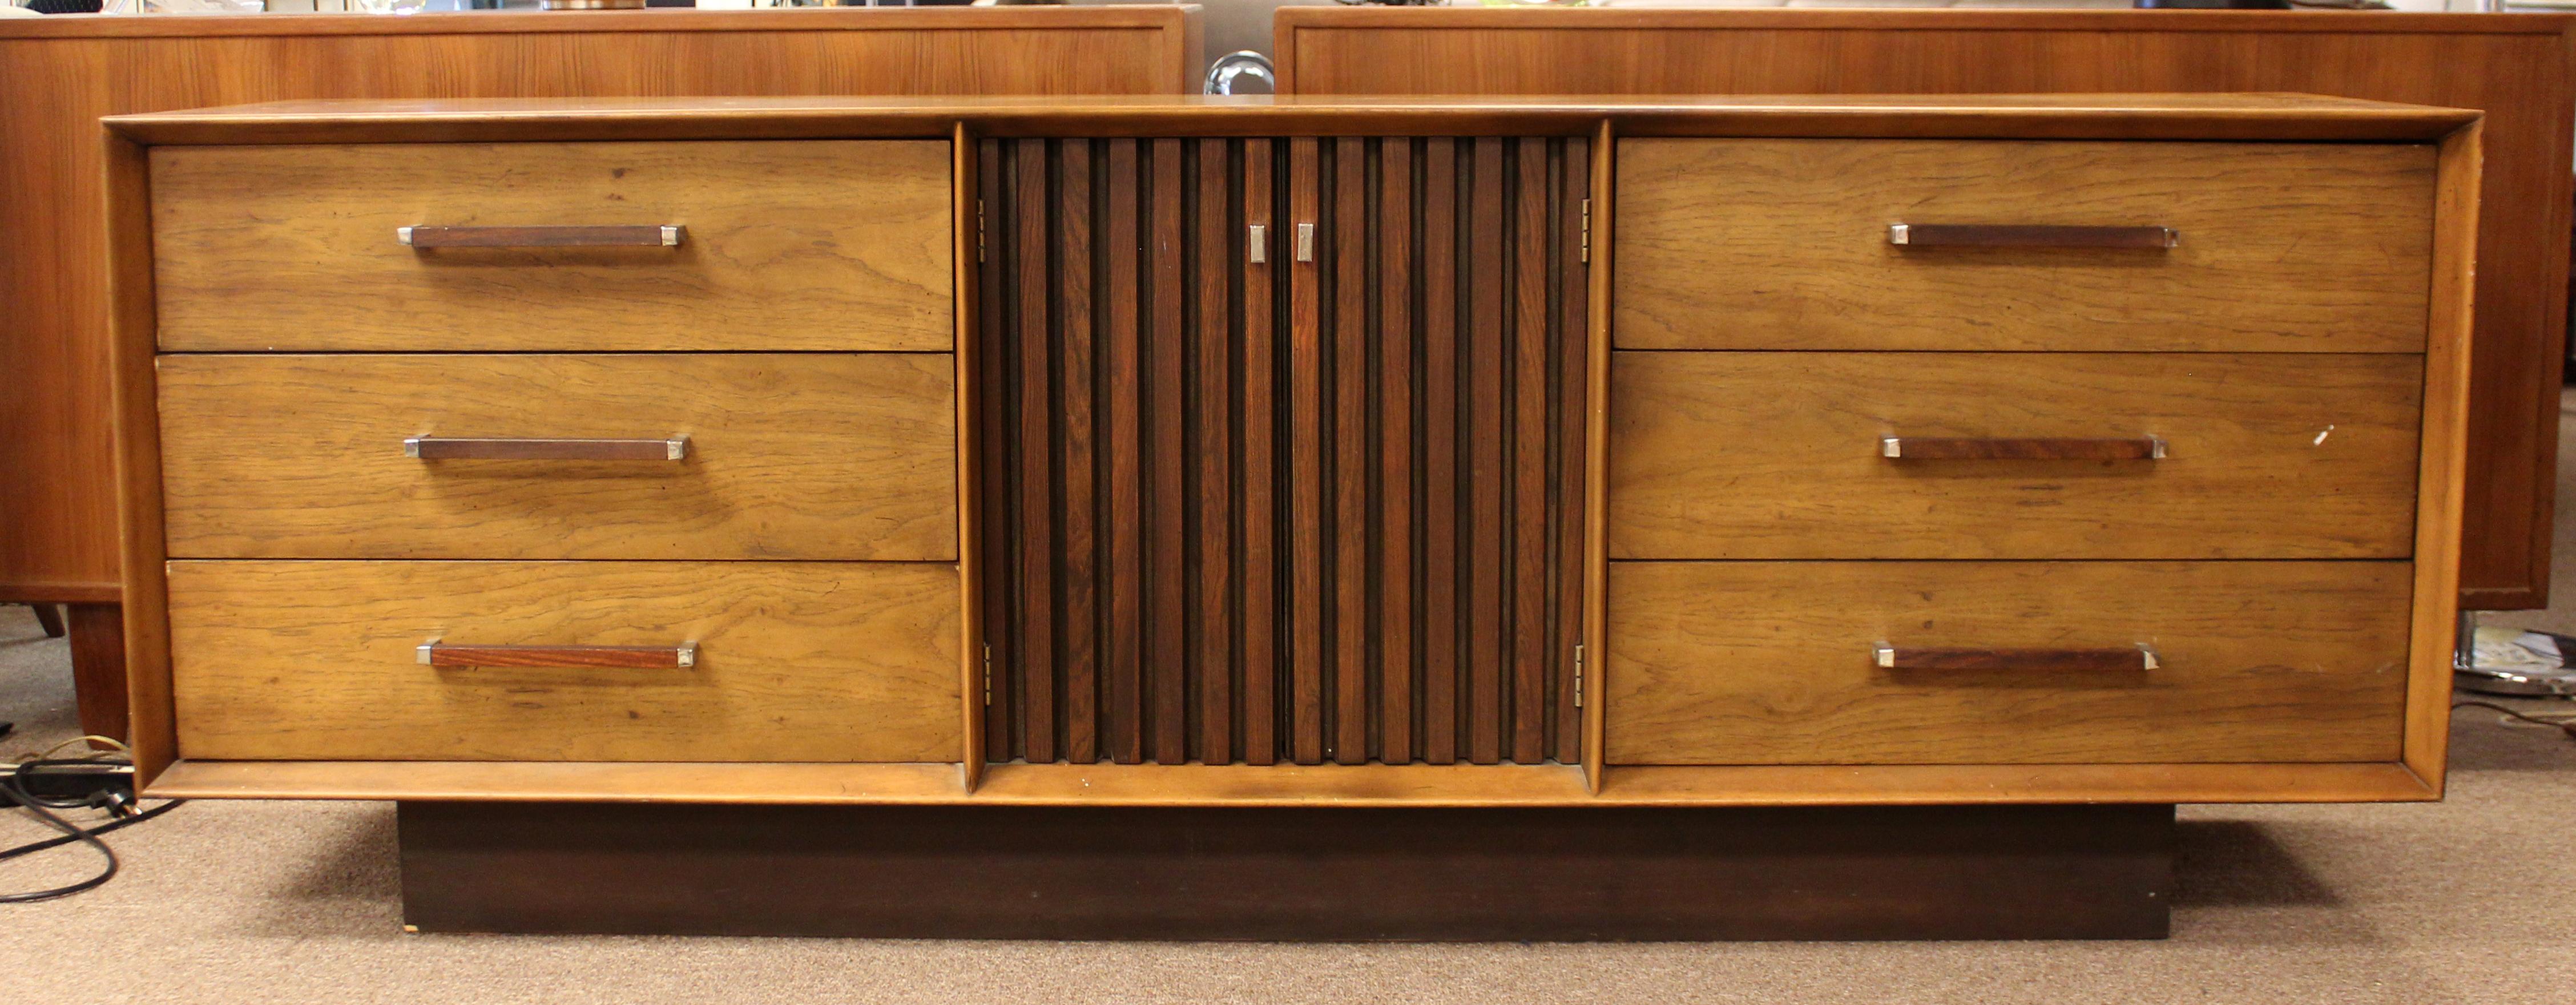 For your consideration is an incredible, ribbed pecan and rosewood bedroom set, including a nine drawer dresser, a four drawer highboy, a pair of tall mirrors,and a headboard, by Lane Altavista, circa 1971. In very good vintage condition. The